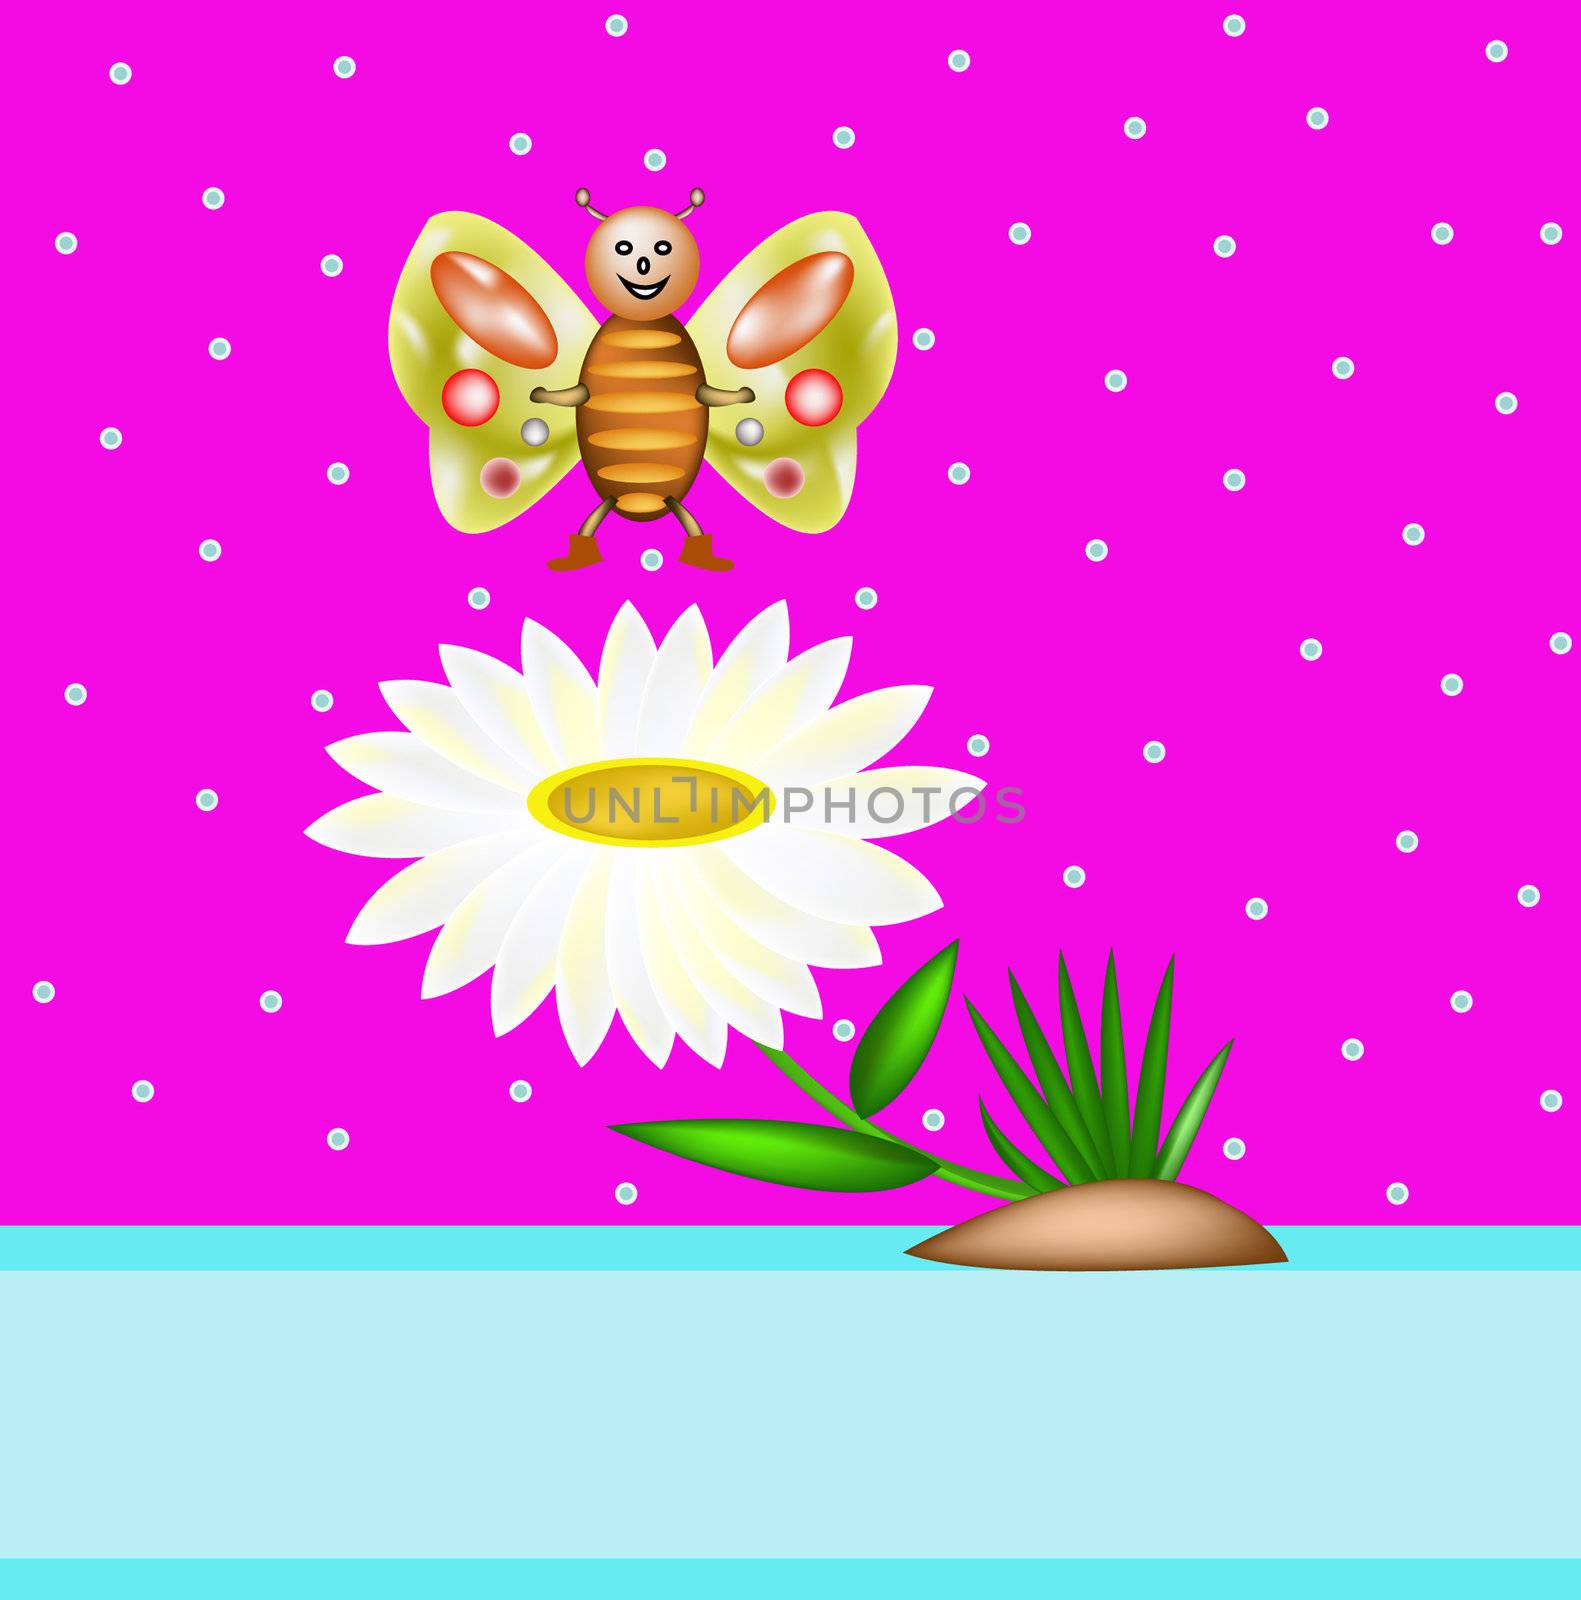 Children's illustration with the butterfly and a flower on a pink background